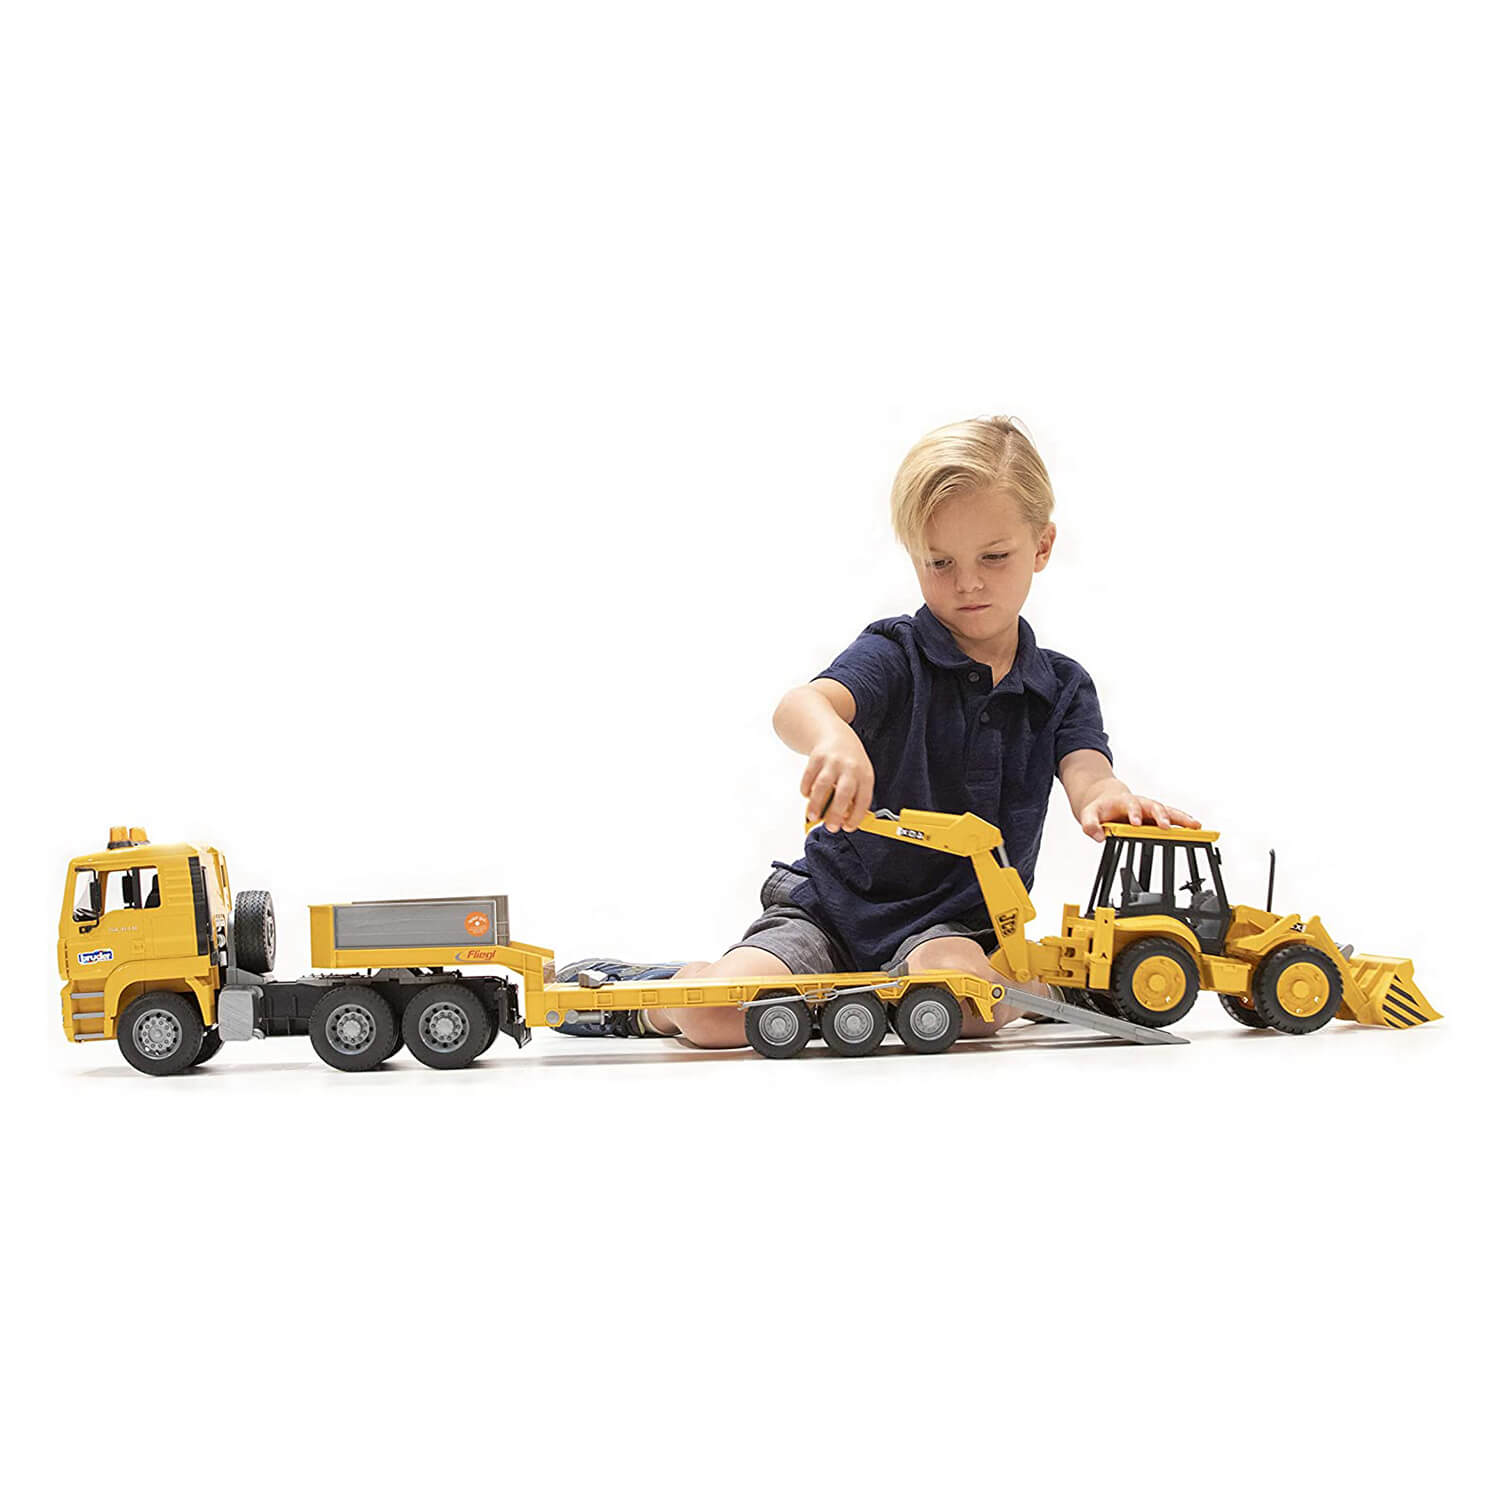 Kid playing with the loader truck toy.